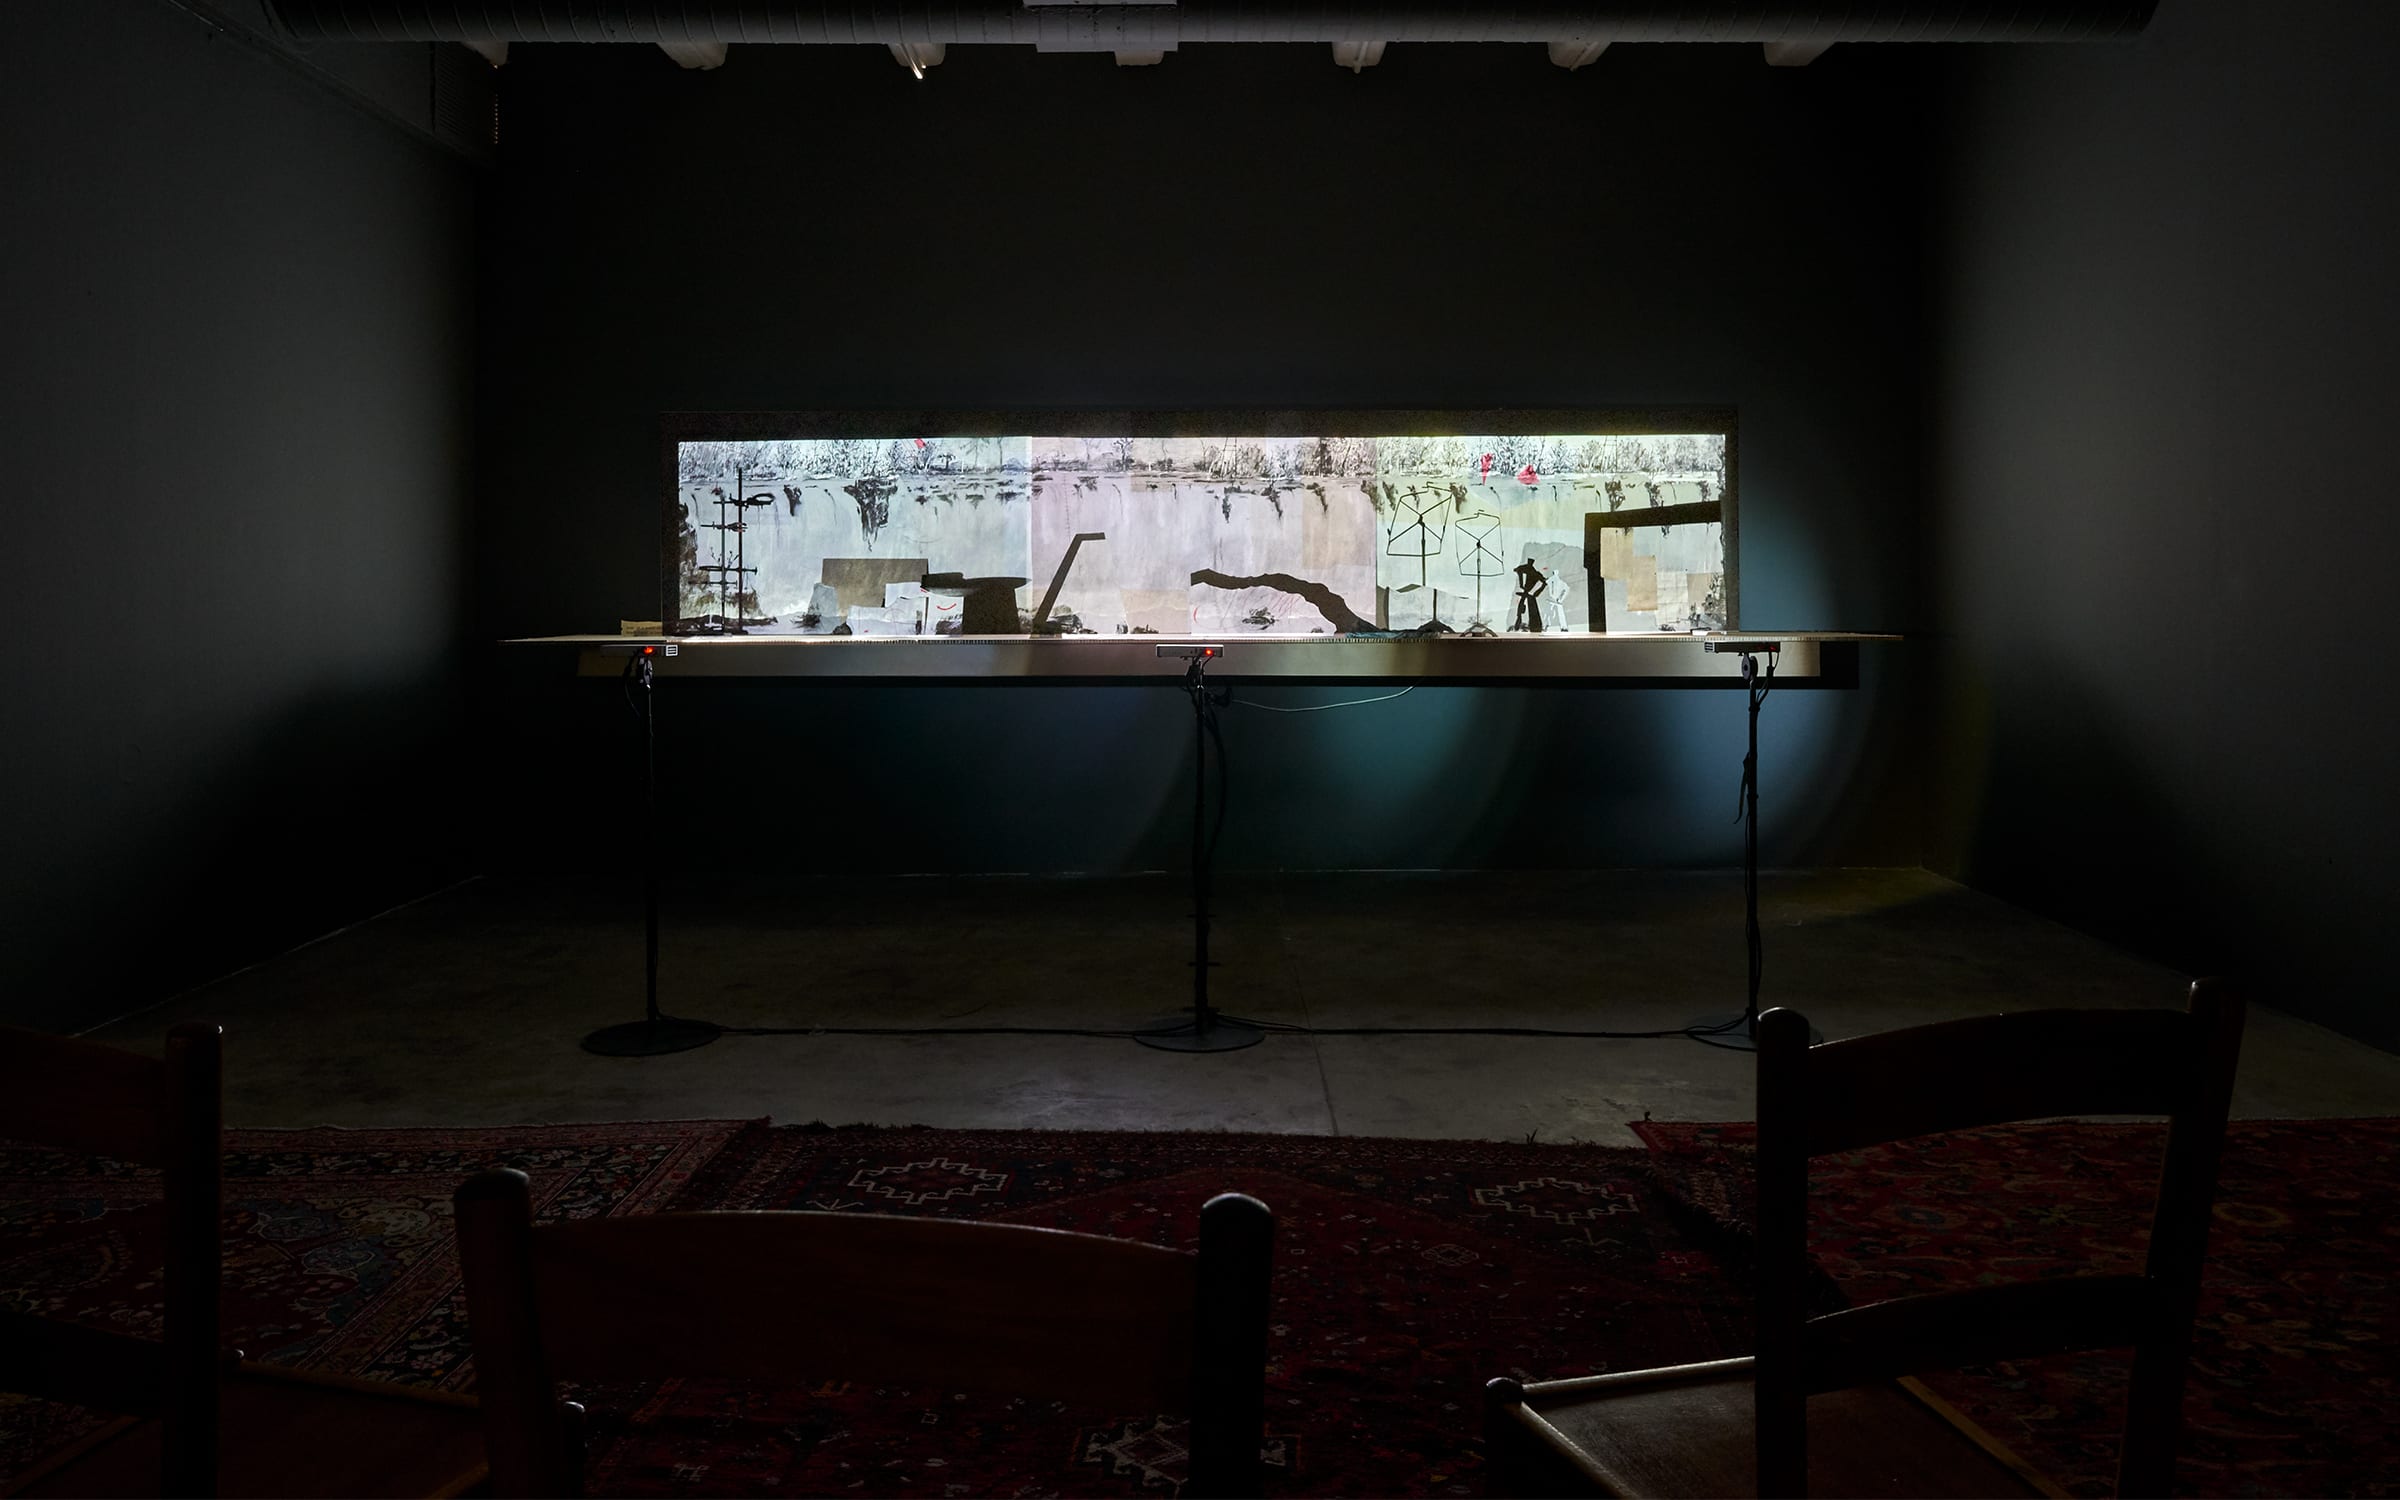 William Kentridge, KABOOM!, 2018. Three-channel HD film installation, three mini-projectors and stands, and model stage with props, dimensions variable; video: 18 minutes 37 seconds.